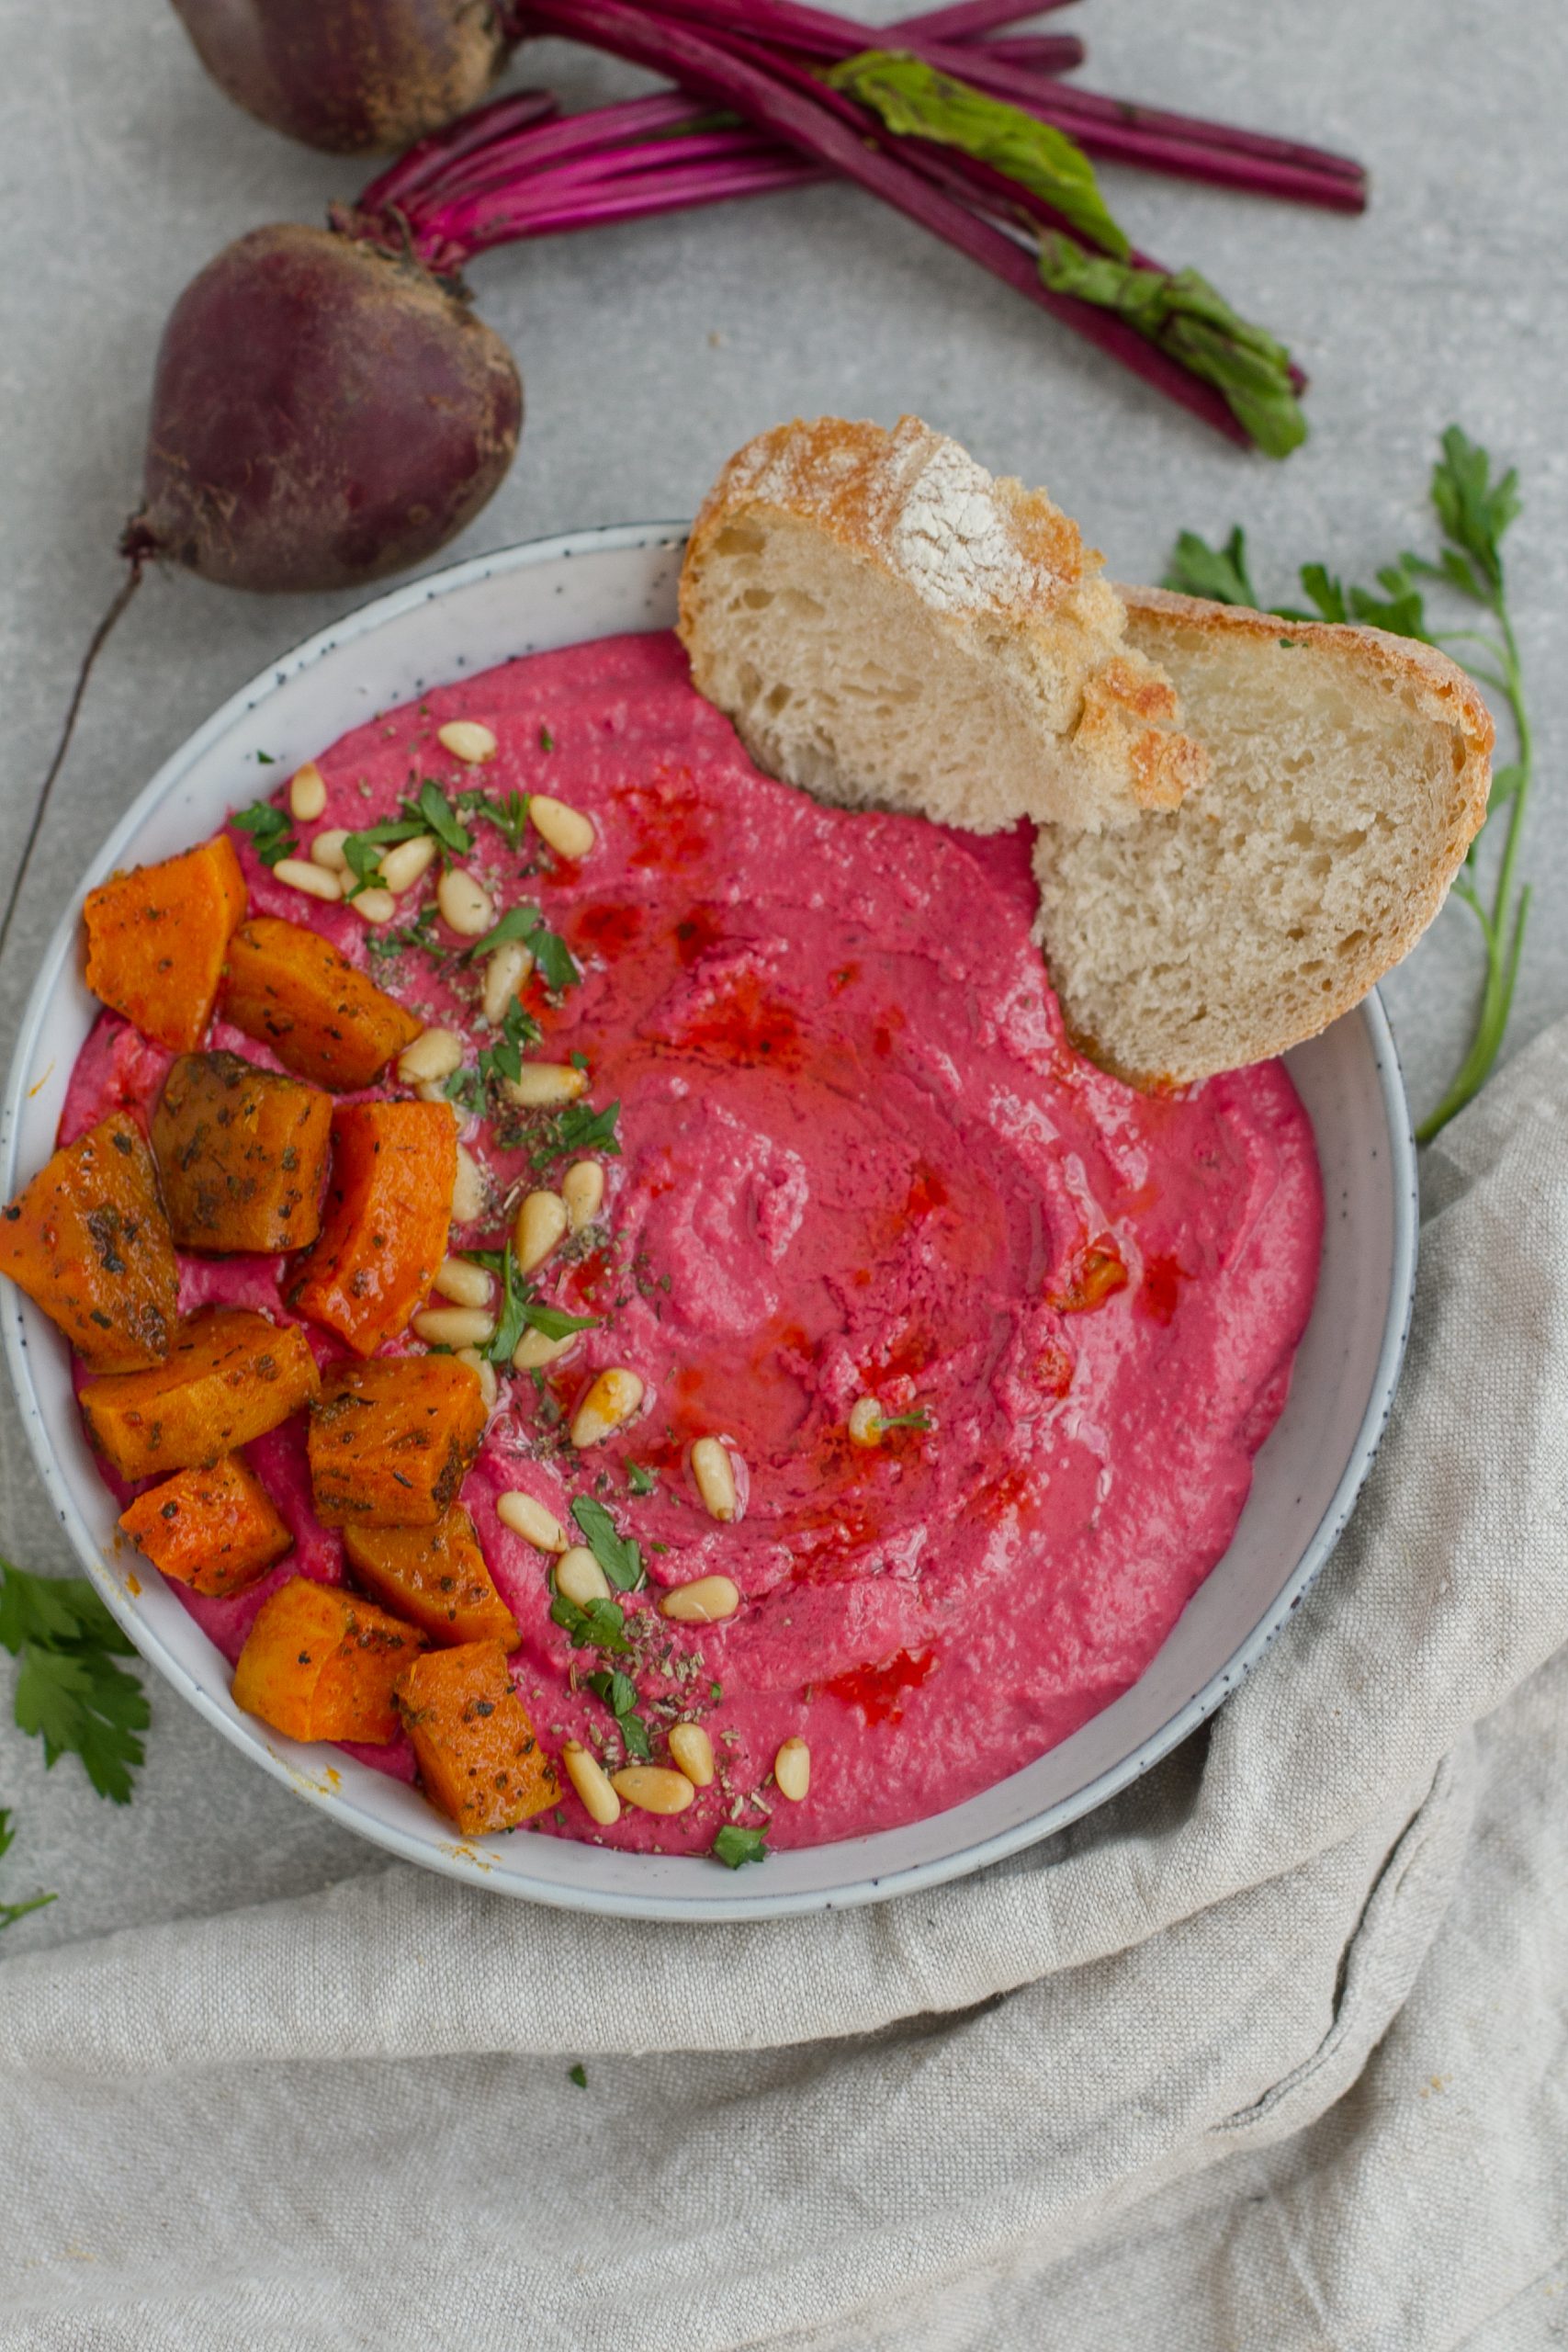 A delicious, creamy butternut squash and beet hummus. This easy hummus recipe is vegan, gluten-free, and made low-FODMAP by the use of garlic-infused olive oil